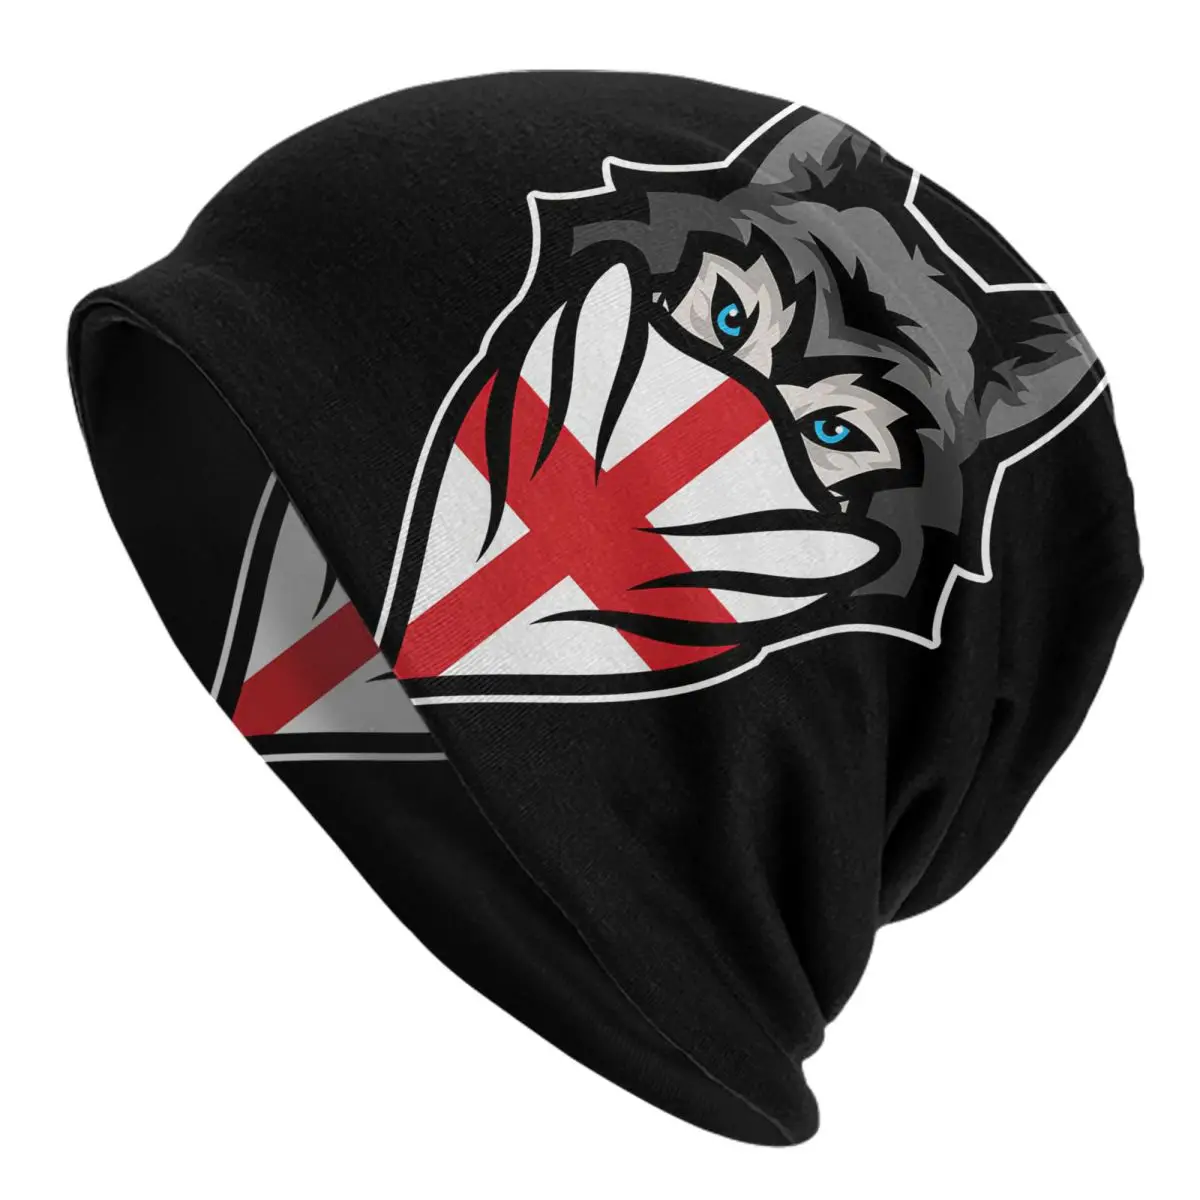 Siberian Husky England Flag Wolf Dog Owner Pet Gift Adult Men's Women's Knit Hat Keep warm winter Funny knitted hat